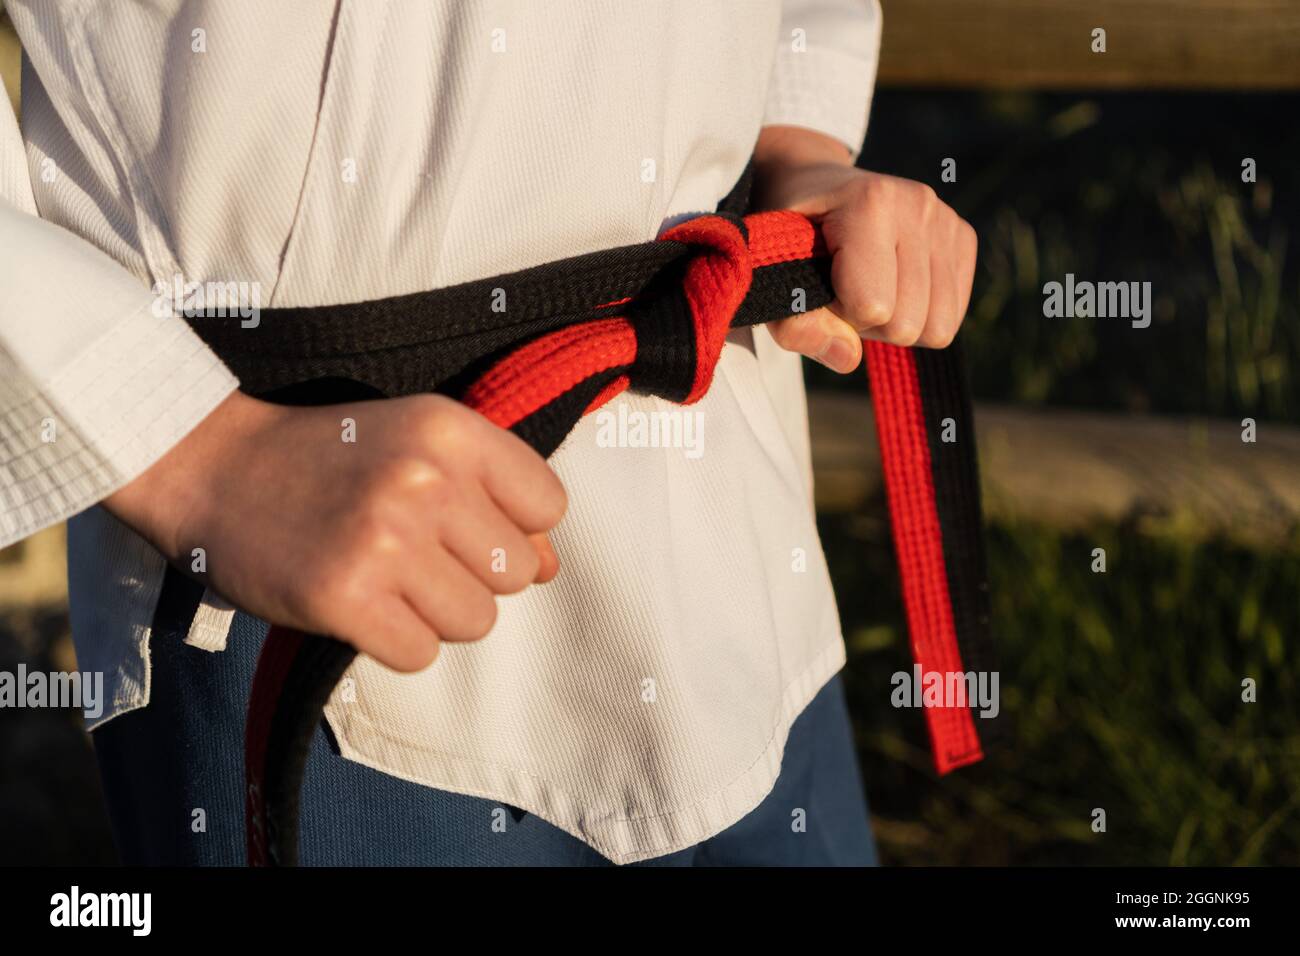 Young karate boy attaching on a black belt on his taekwondo uniform before training outdoors. Sport, discipline and martial arts concept. Stock Photo